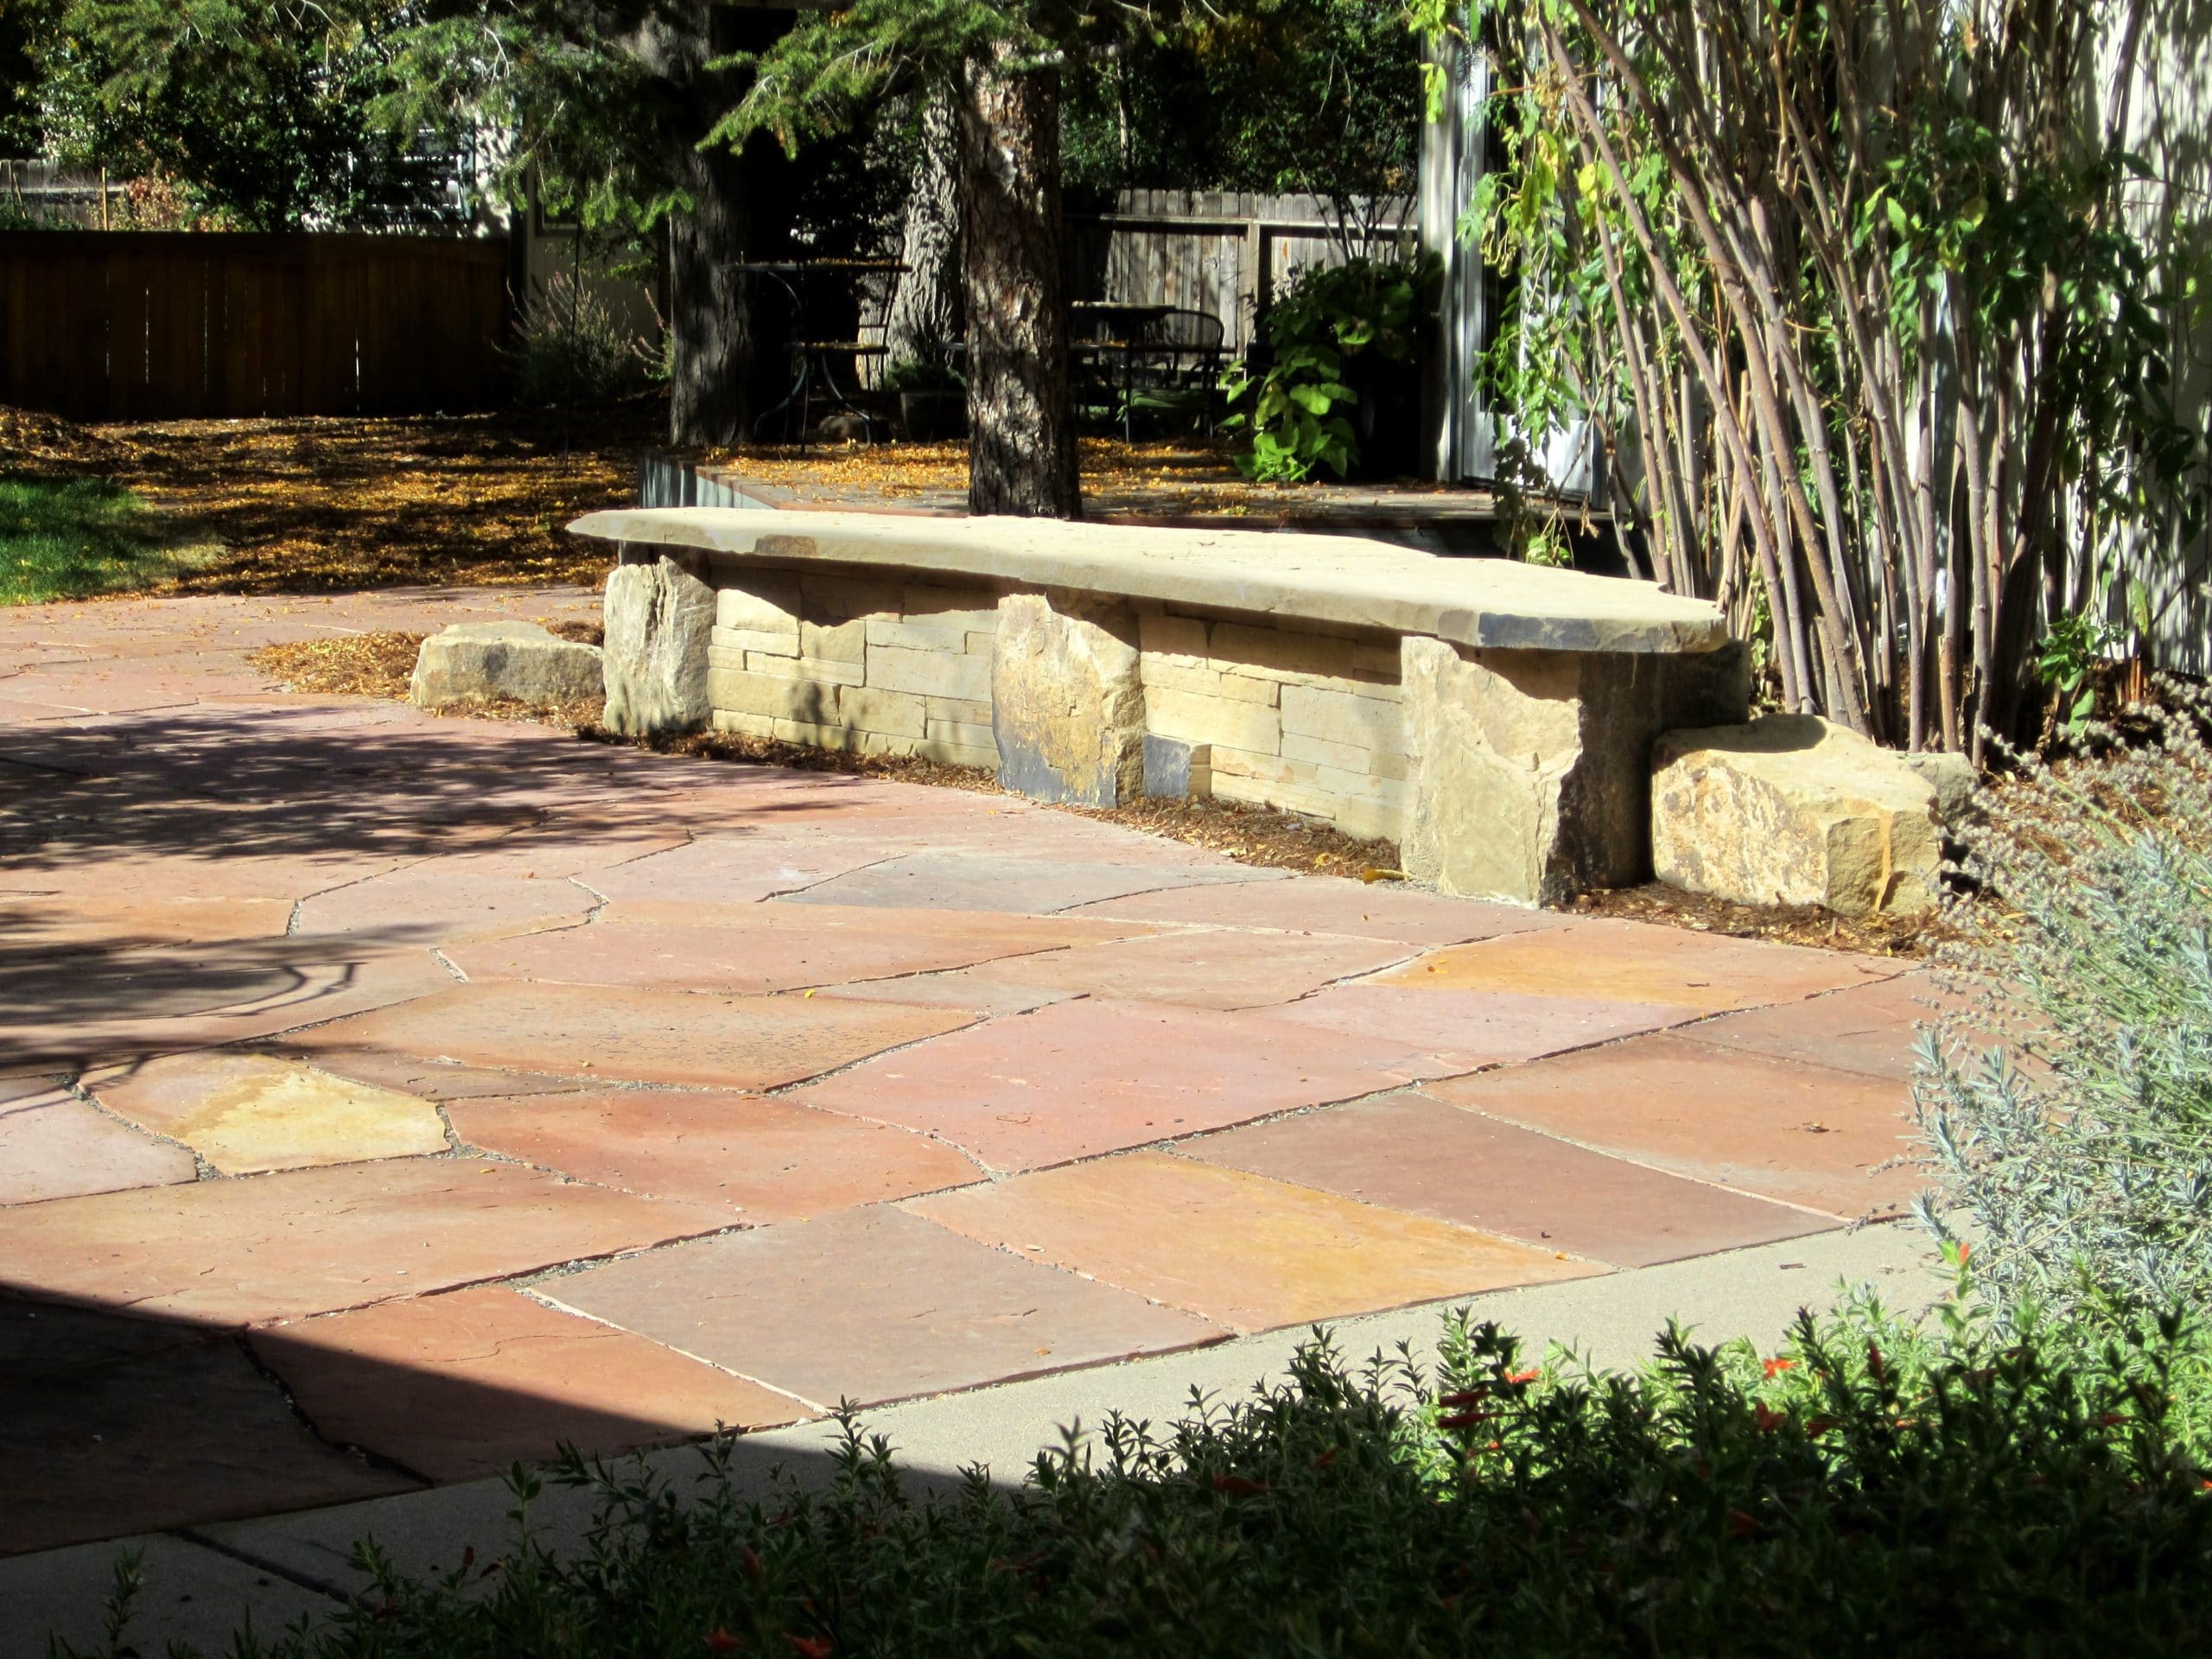 Flat stone patio with a flat stone bench seat.